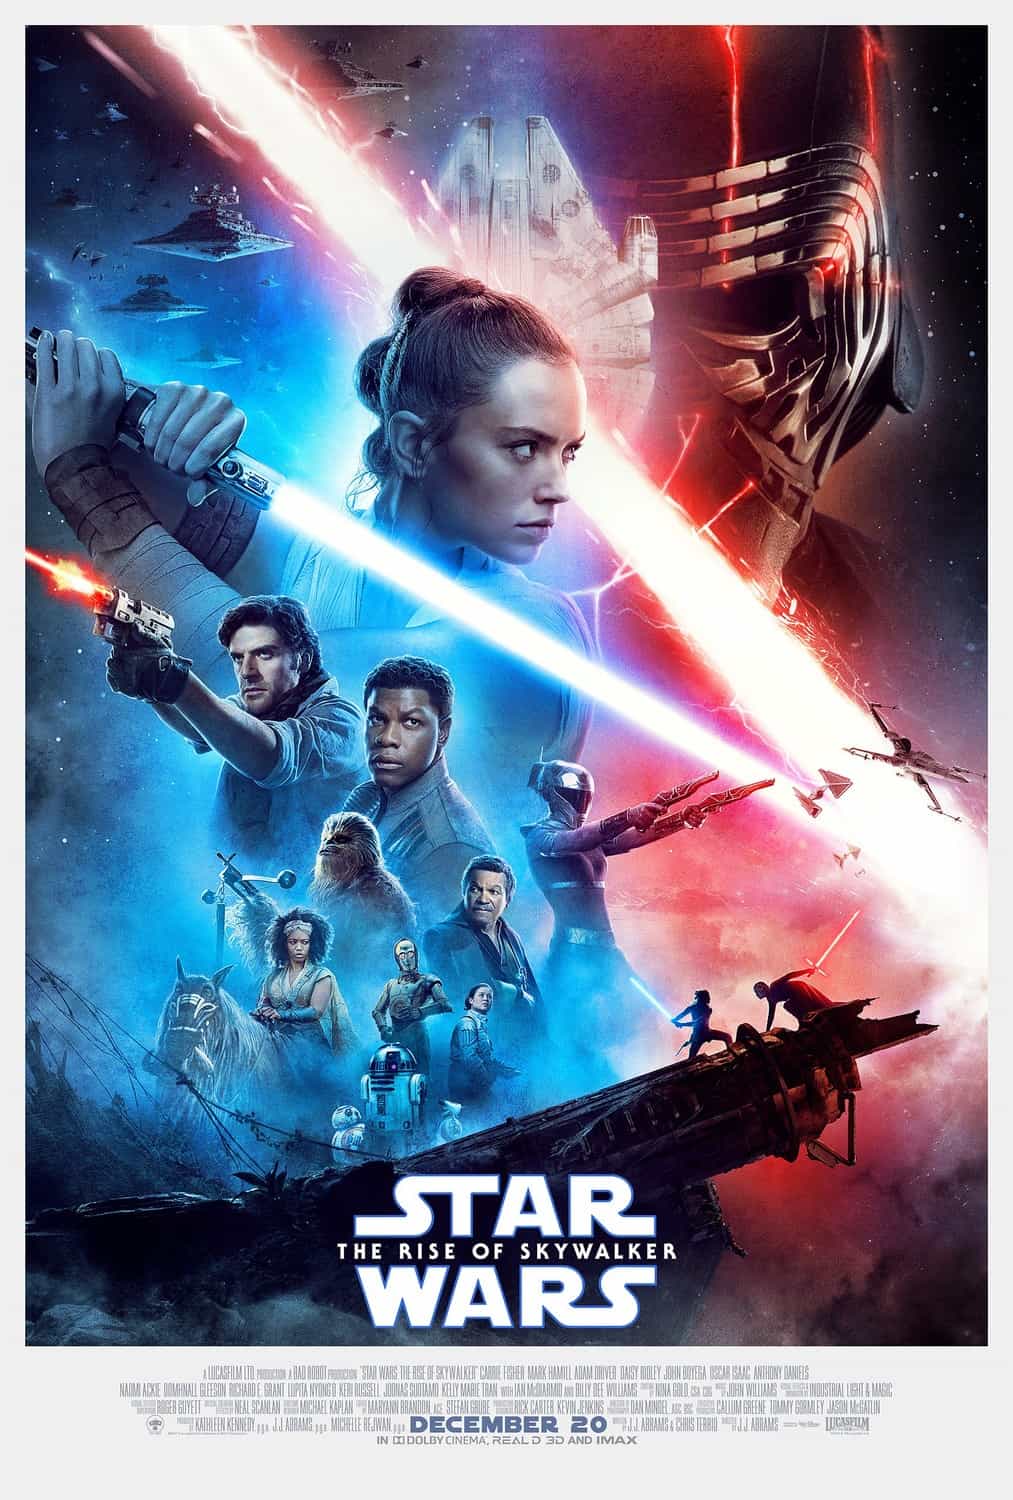 D23: Disney release the conference mini trailer for Star Wars: The Rise Of Skywalker with new footage